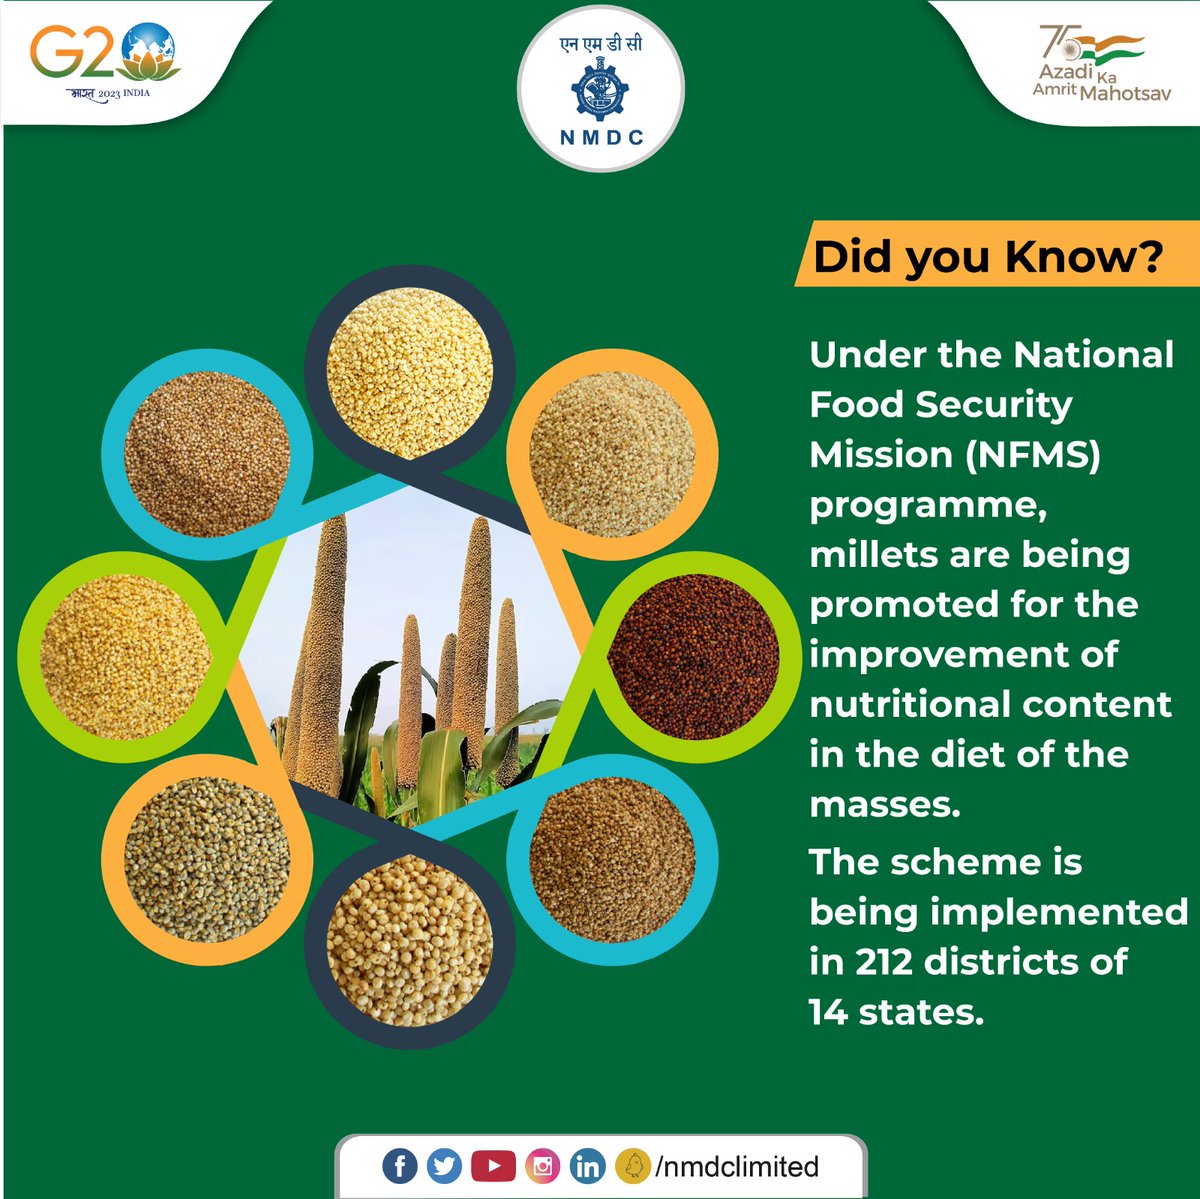 The key aim of this mission is to position millets as Nutri Cereals with their benefits being popularized amongst the masses. NFMS, through sustained and effective campaigns, is now taking up research to develop high-yielding varieties.

#NMDC #NFMS #Milletfacts #IYOM